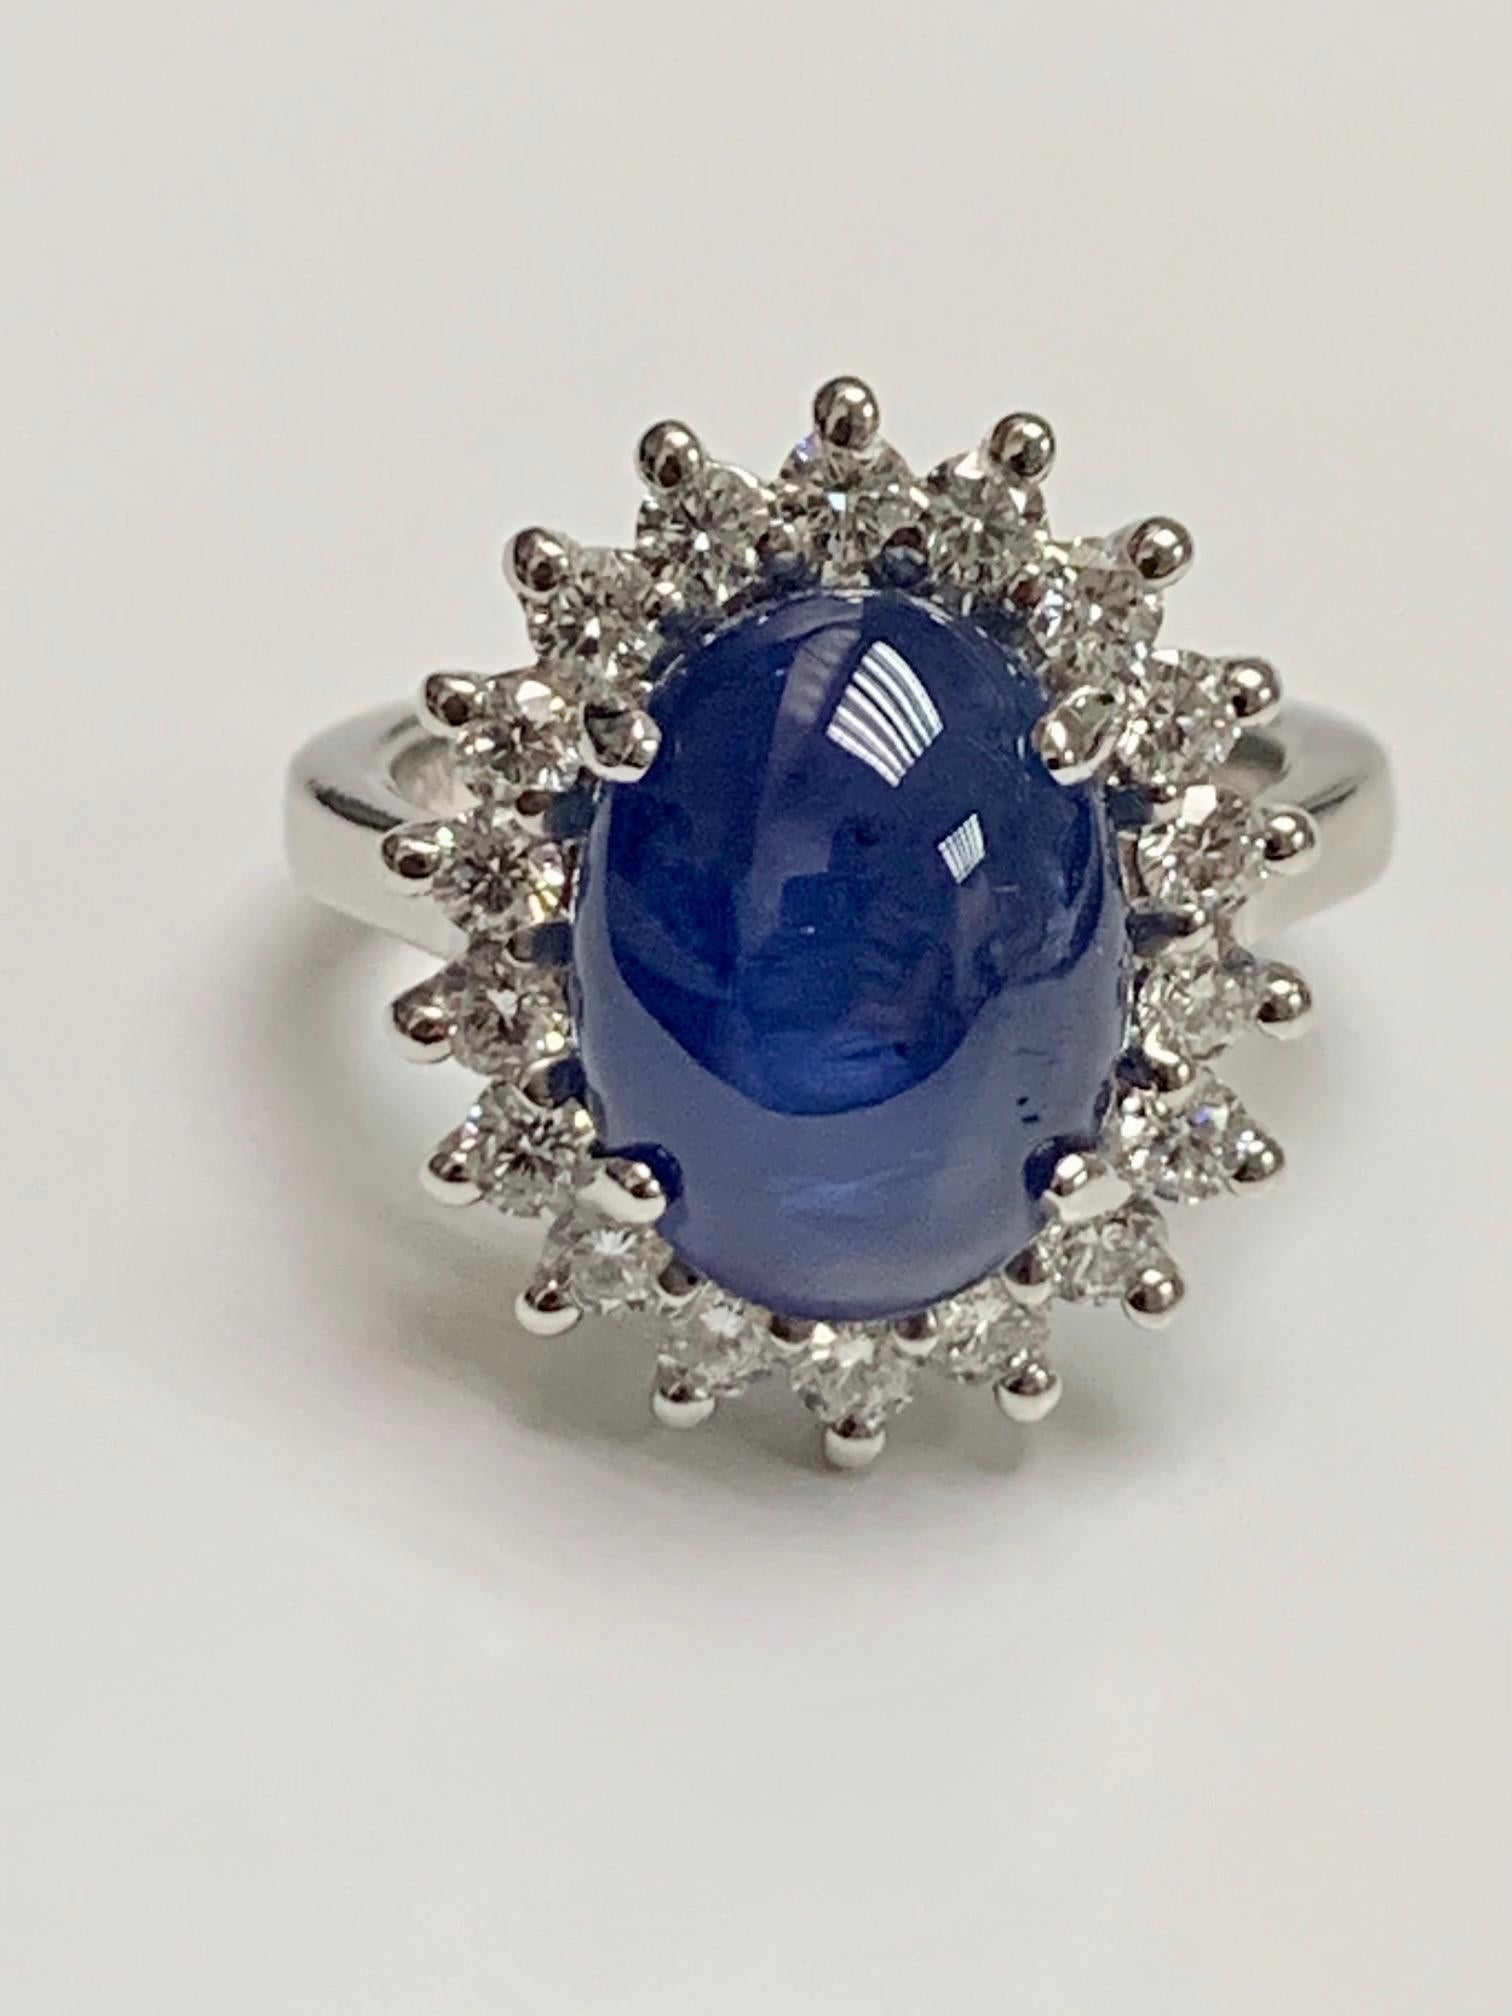 8.97 Carat Cab blue sapphire set in 18k white gold ring surounded with 1.4 carat diamond .